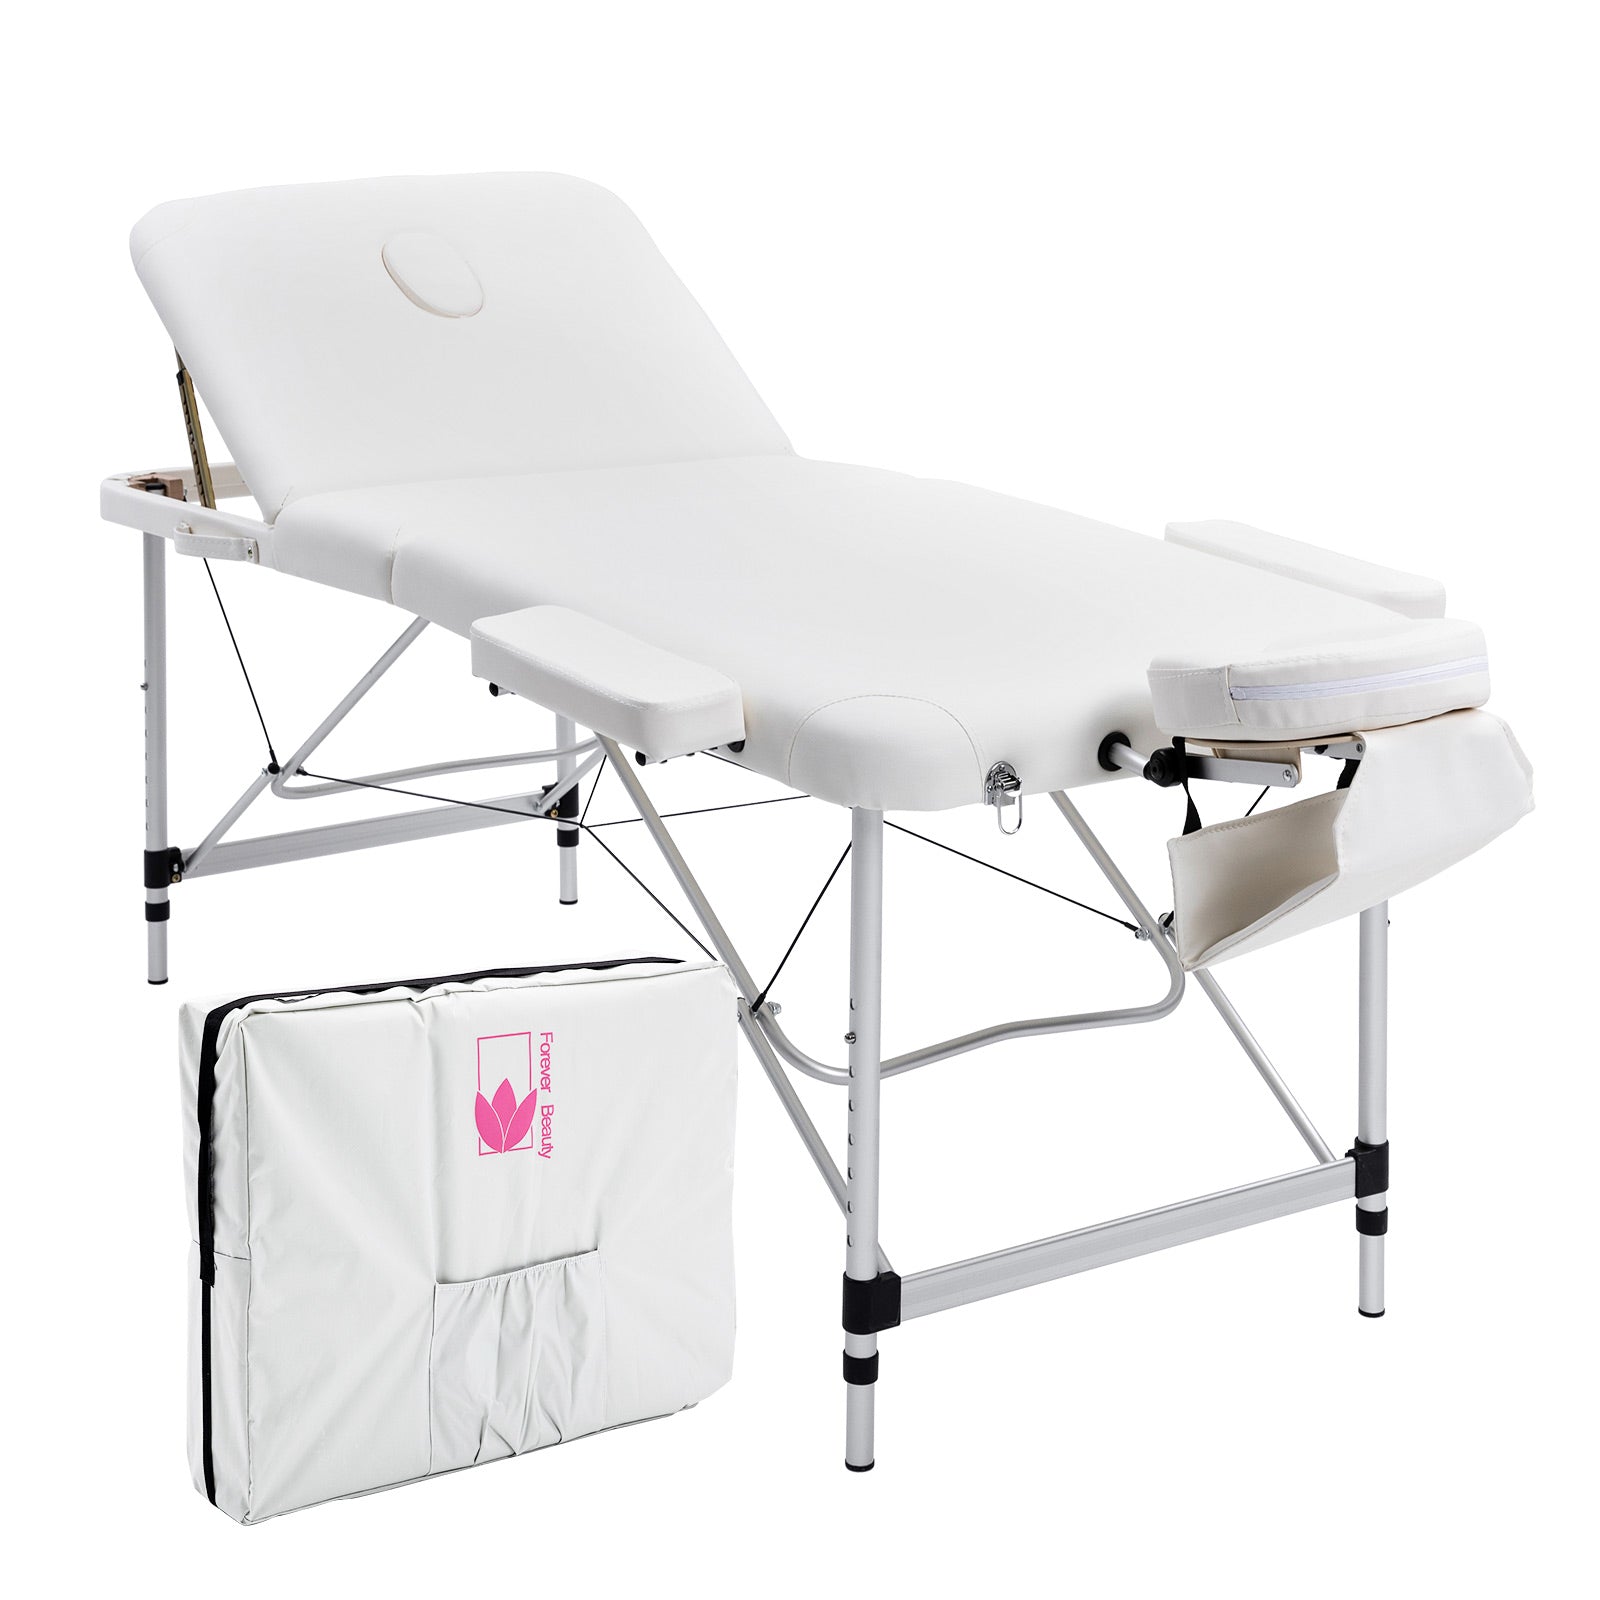 forever-beauty-white-portable-beauty-massage-table-bed-therapy-waxing-3-fold-70cm-aluminium